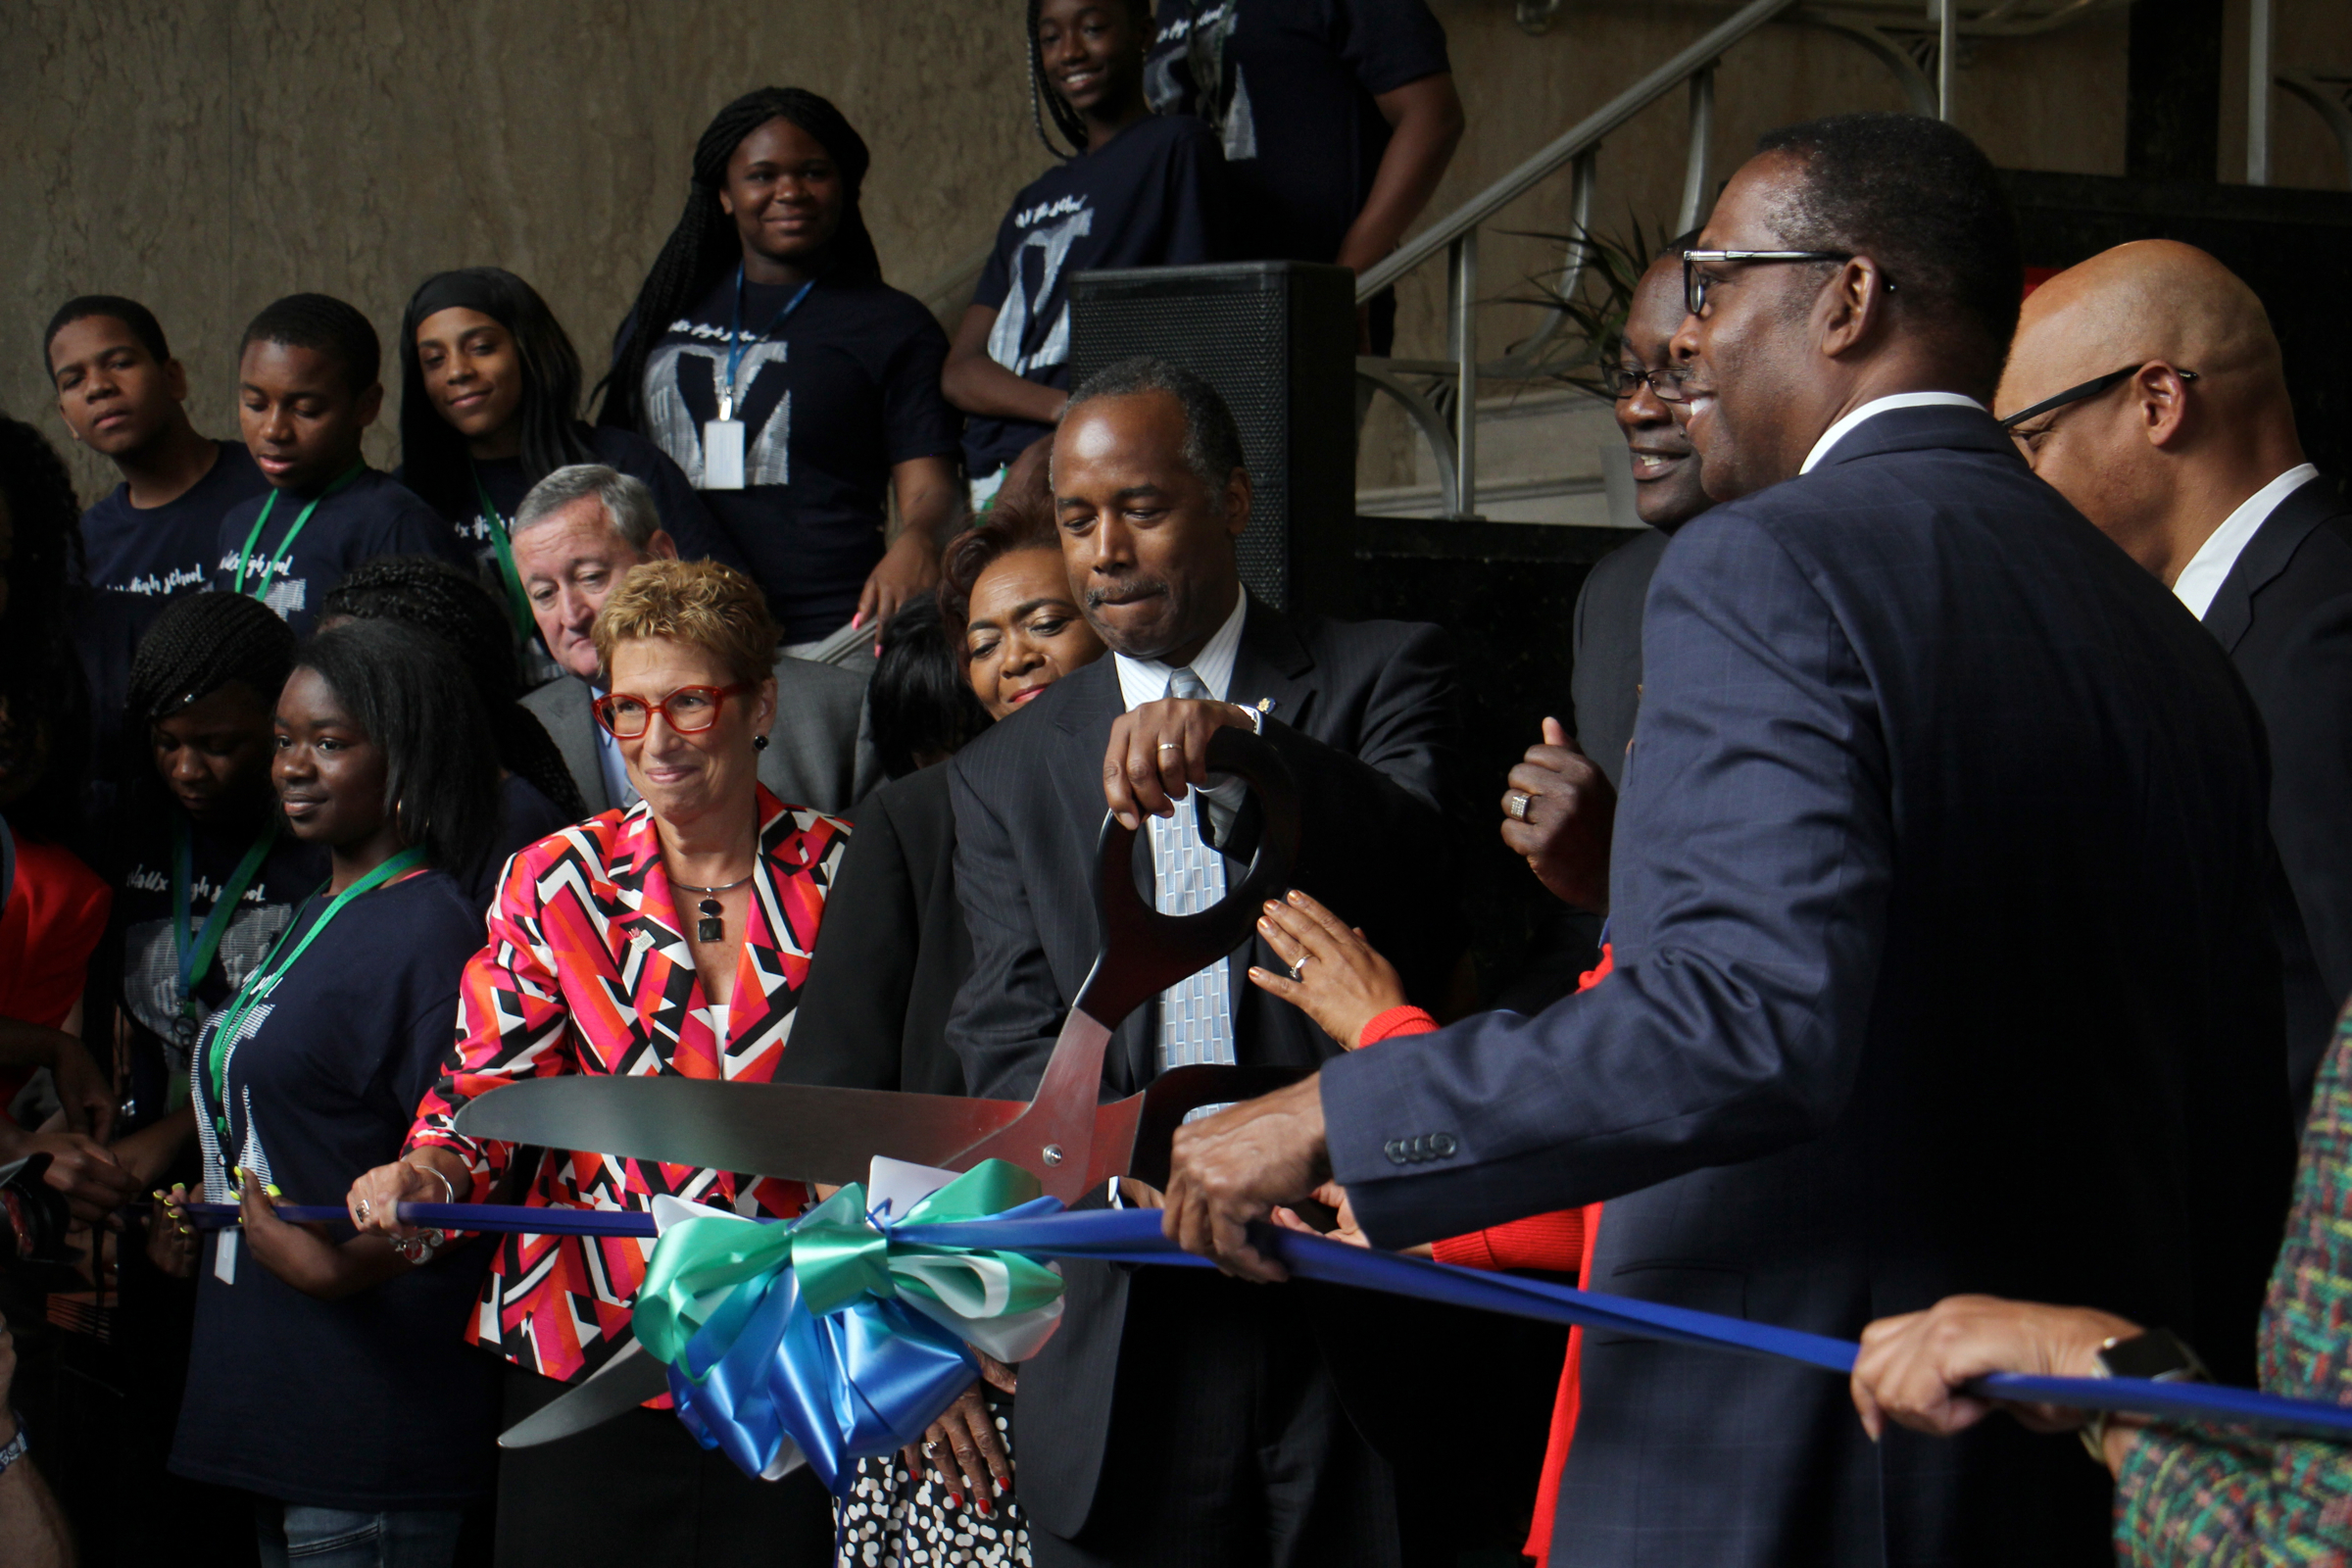 Flanked by Philadelphia officials, HUD Sec. Carson cuts ribbon at opening of Vaux Big Picture High School in Sharswood